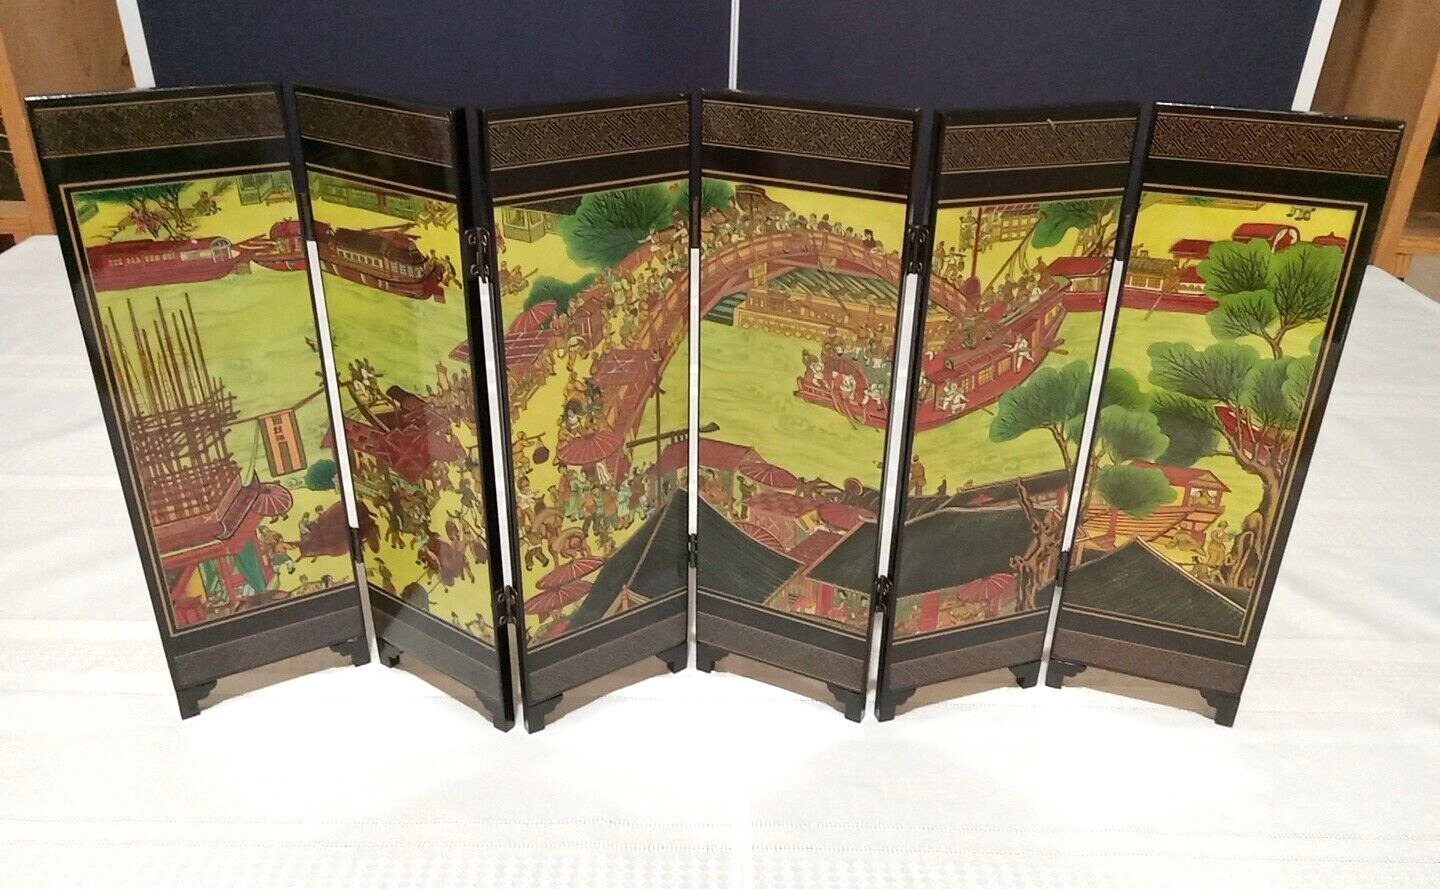 Chinese Mini Table Top Divider - 6 panels